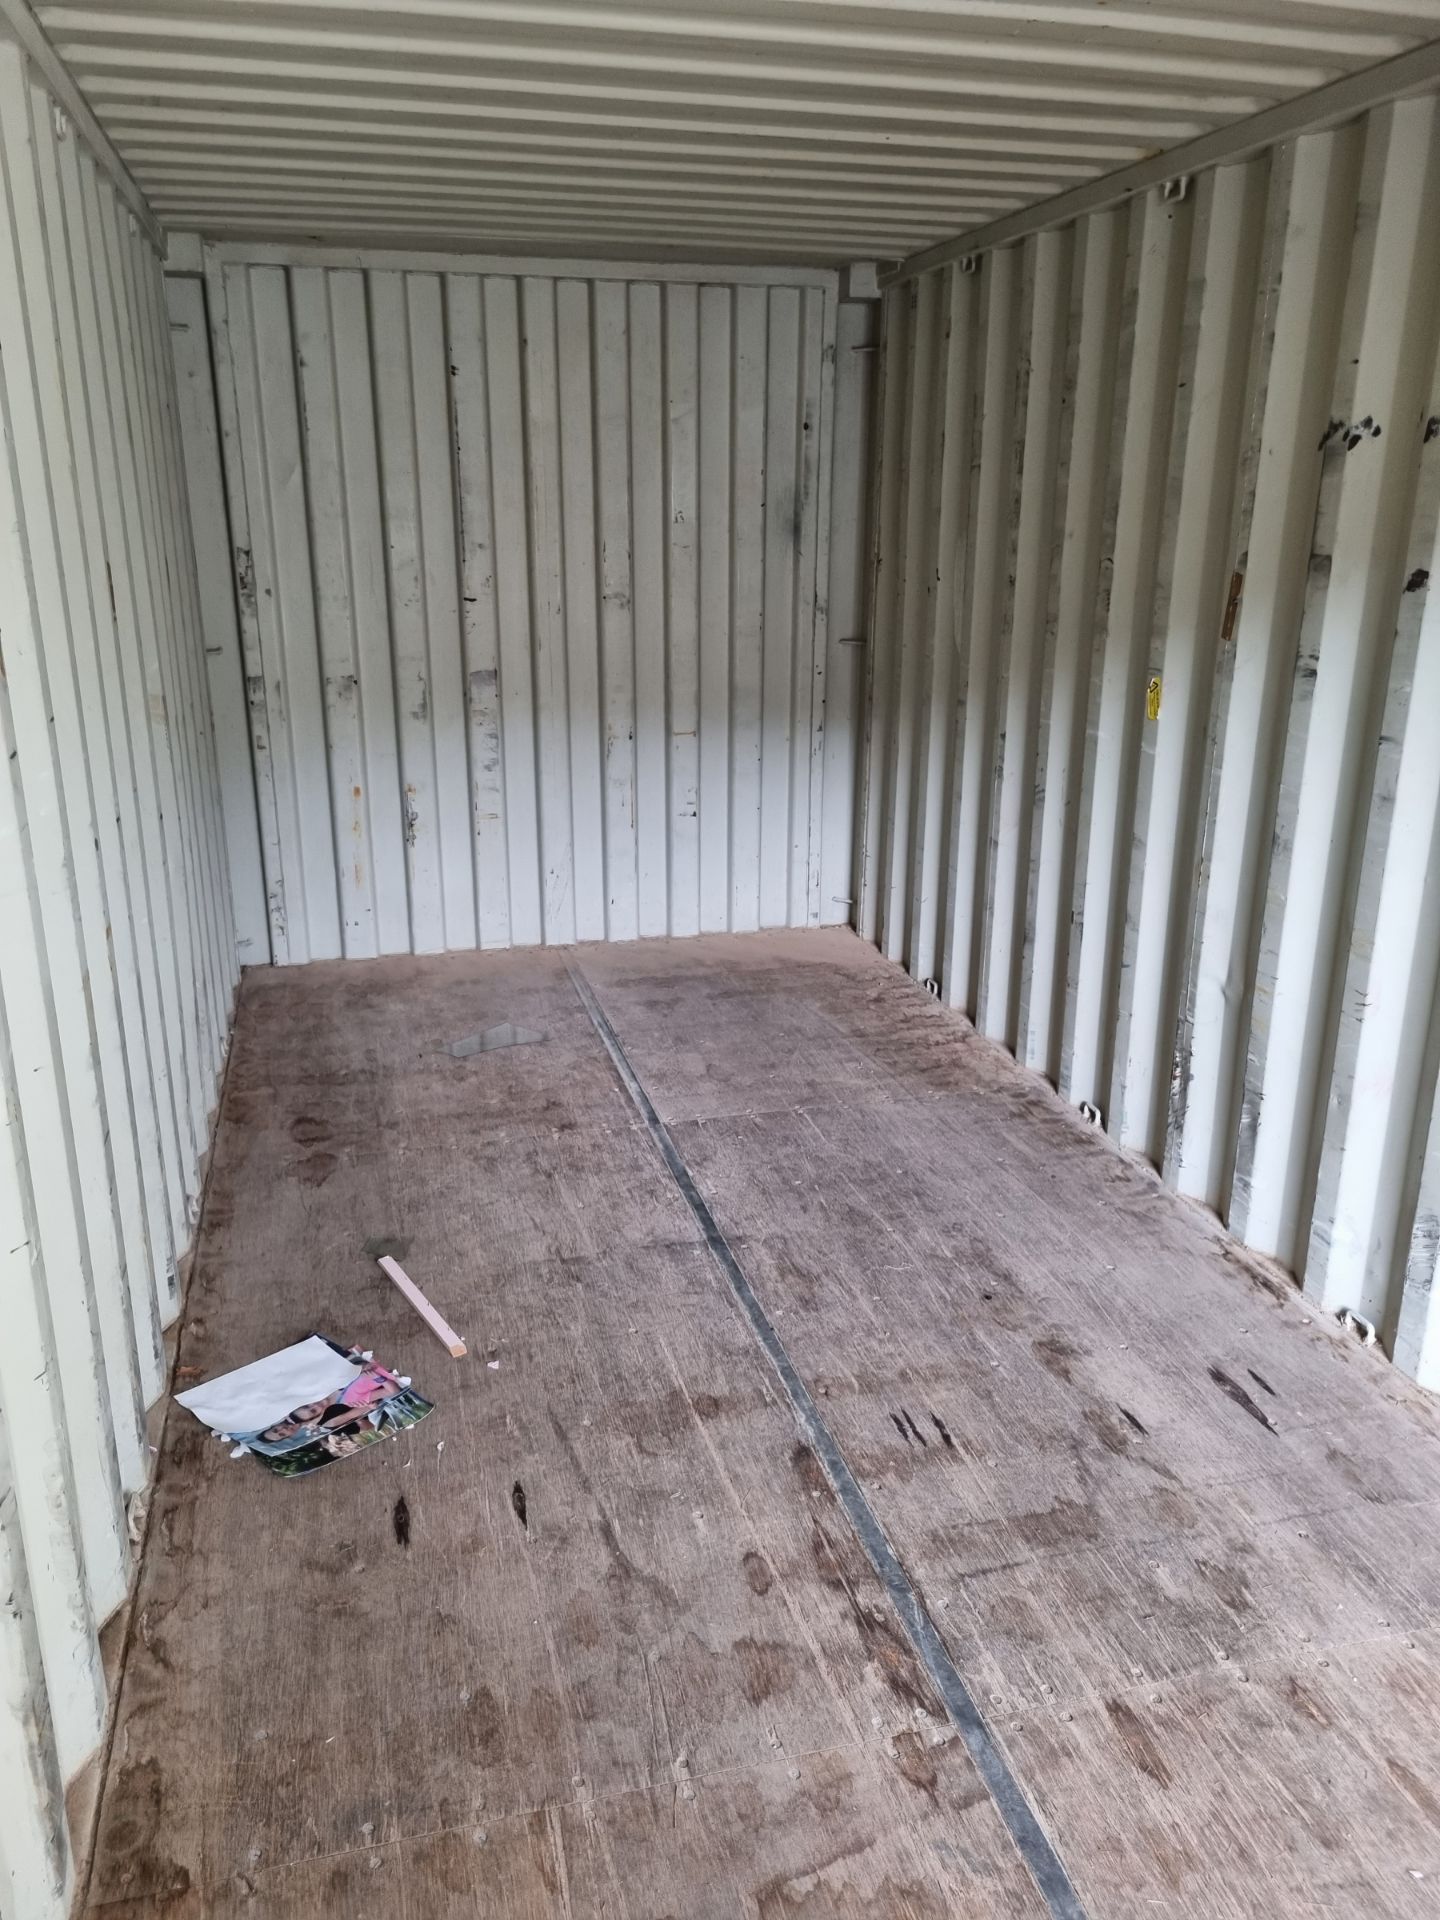 Med Union - Model MU20-1001-TA shipping container - L600 x W240 x H258cm - Image 12 of 12